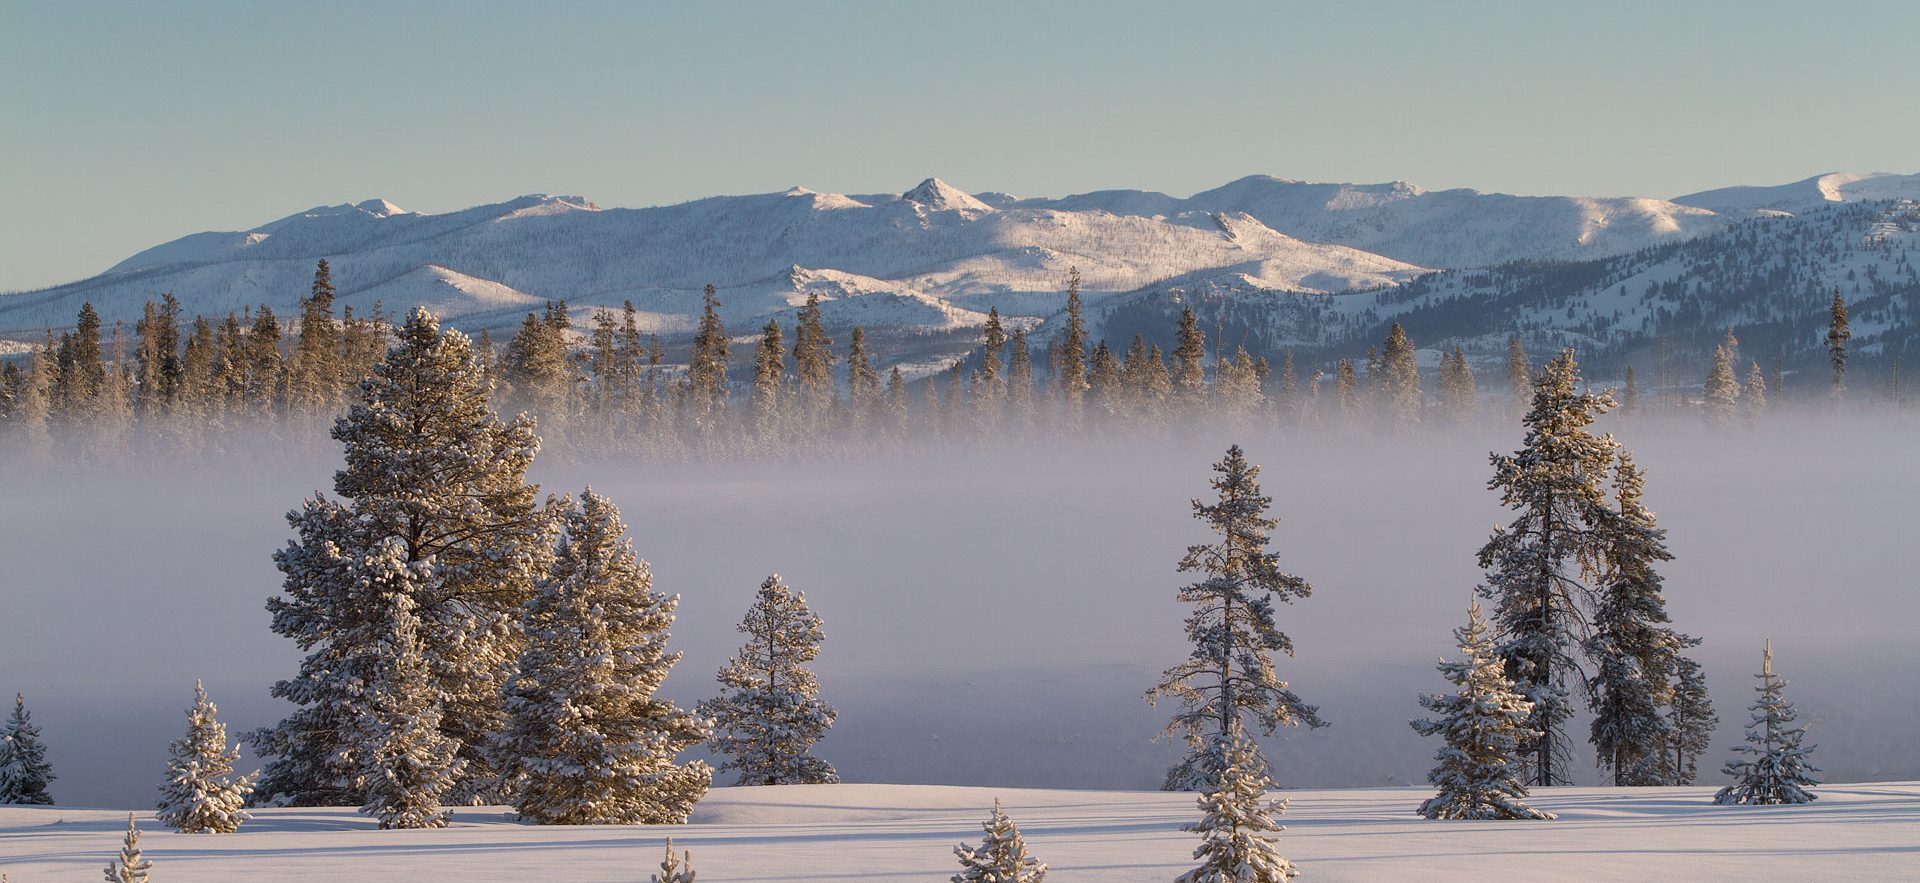 Fog sits over Yellowstone National Park in the winter.